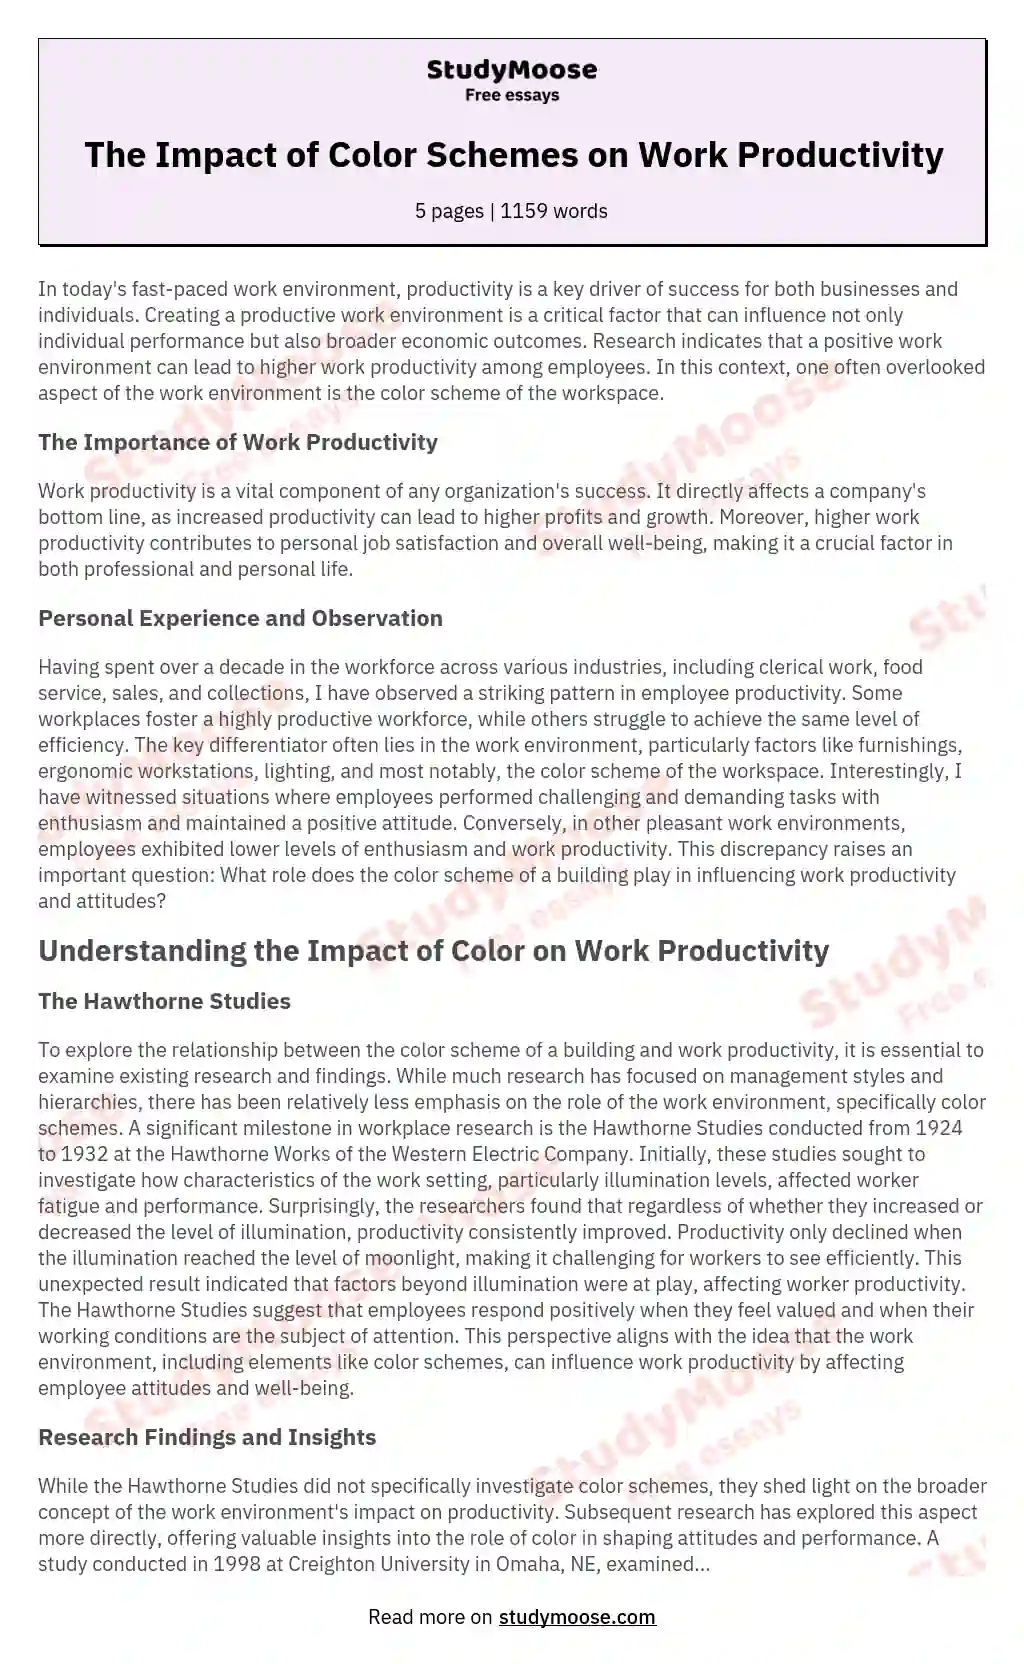 The Impact of Color Schemes on Work Productivity essay